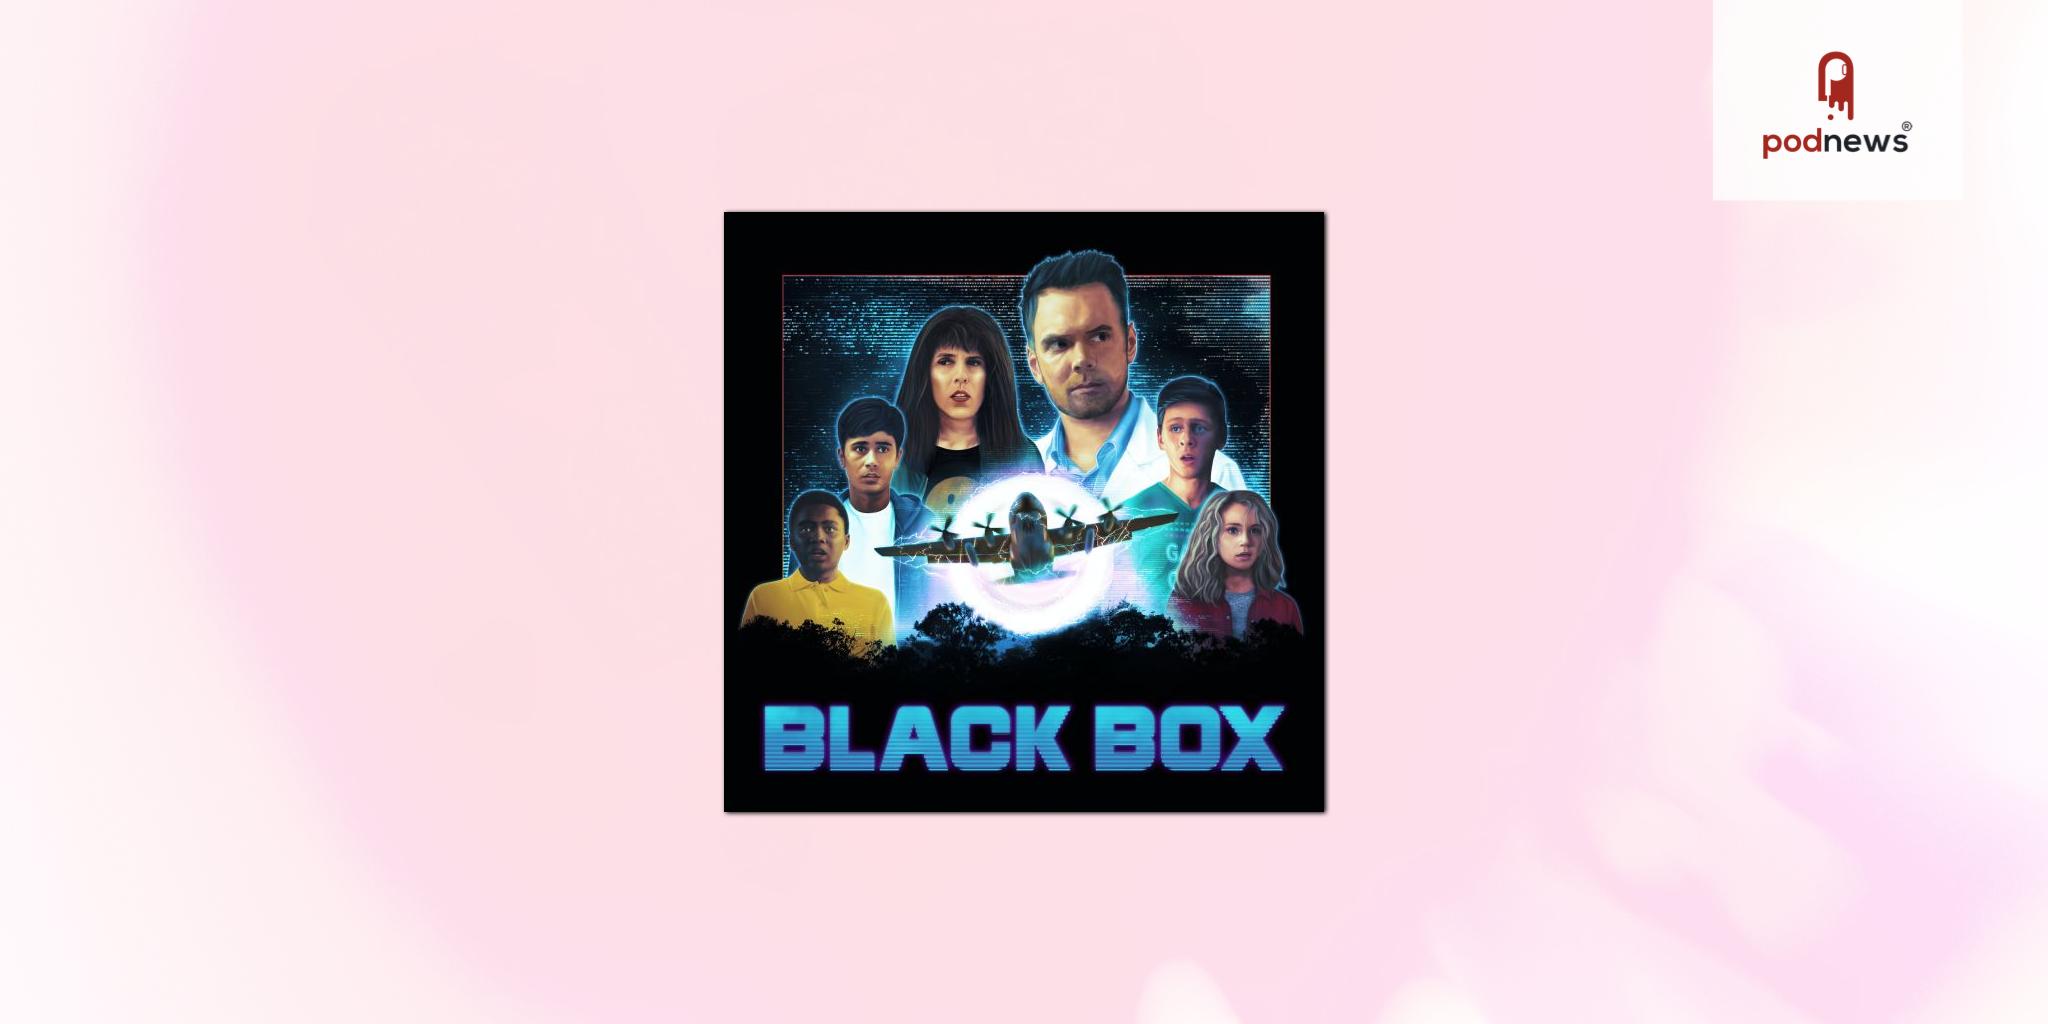 Black Box, sci-fi adventure podcast series starring Joel McHale and Kelsey Grammar, releases